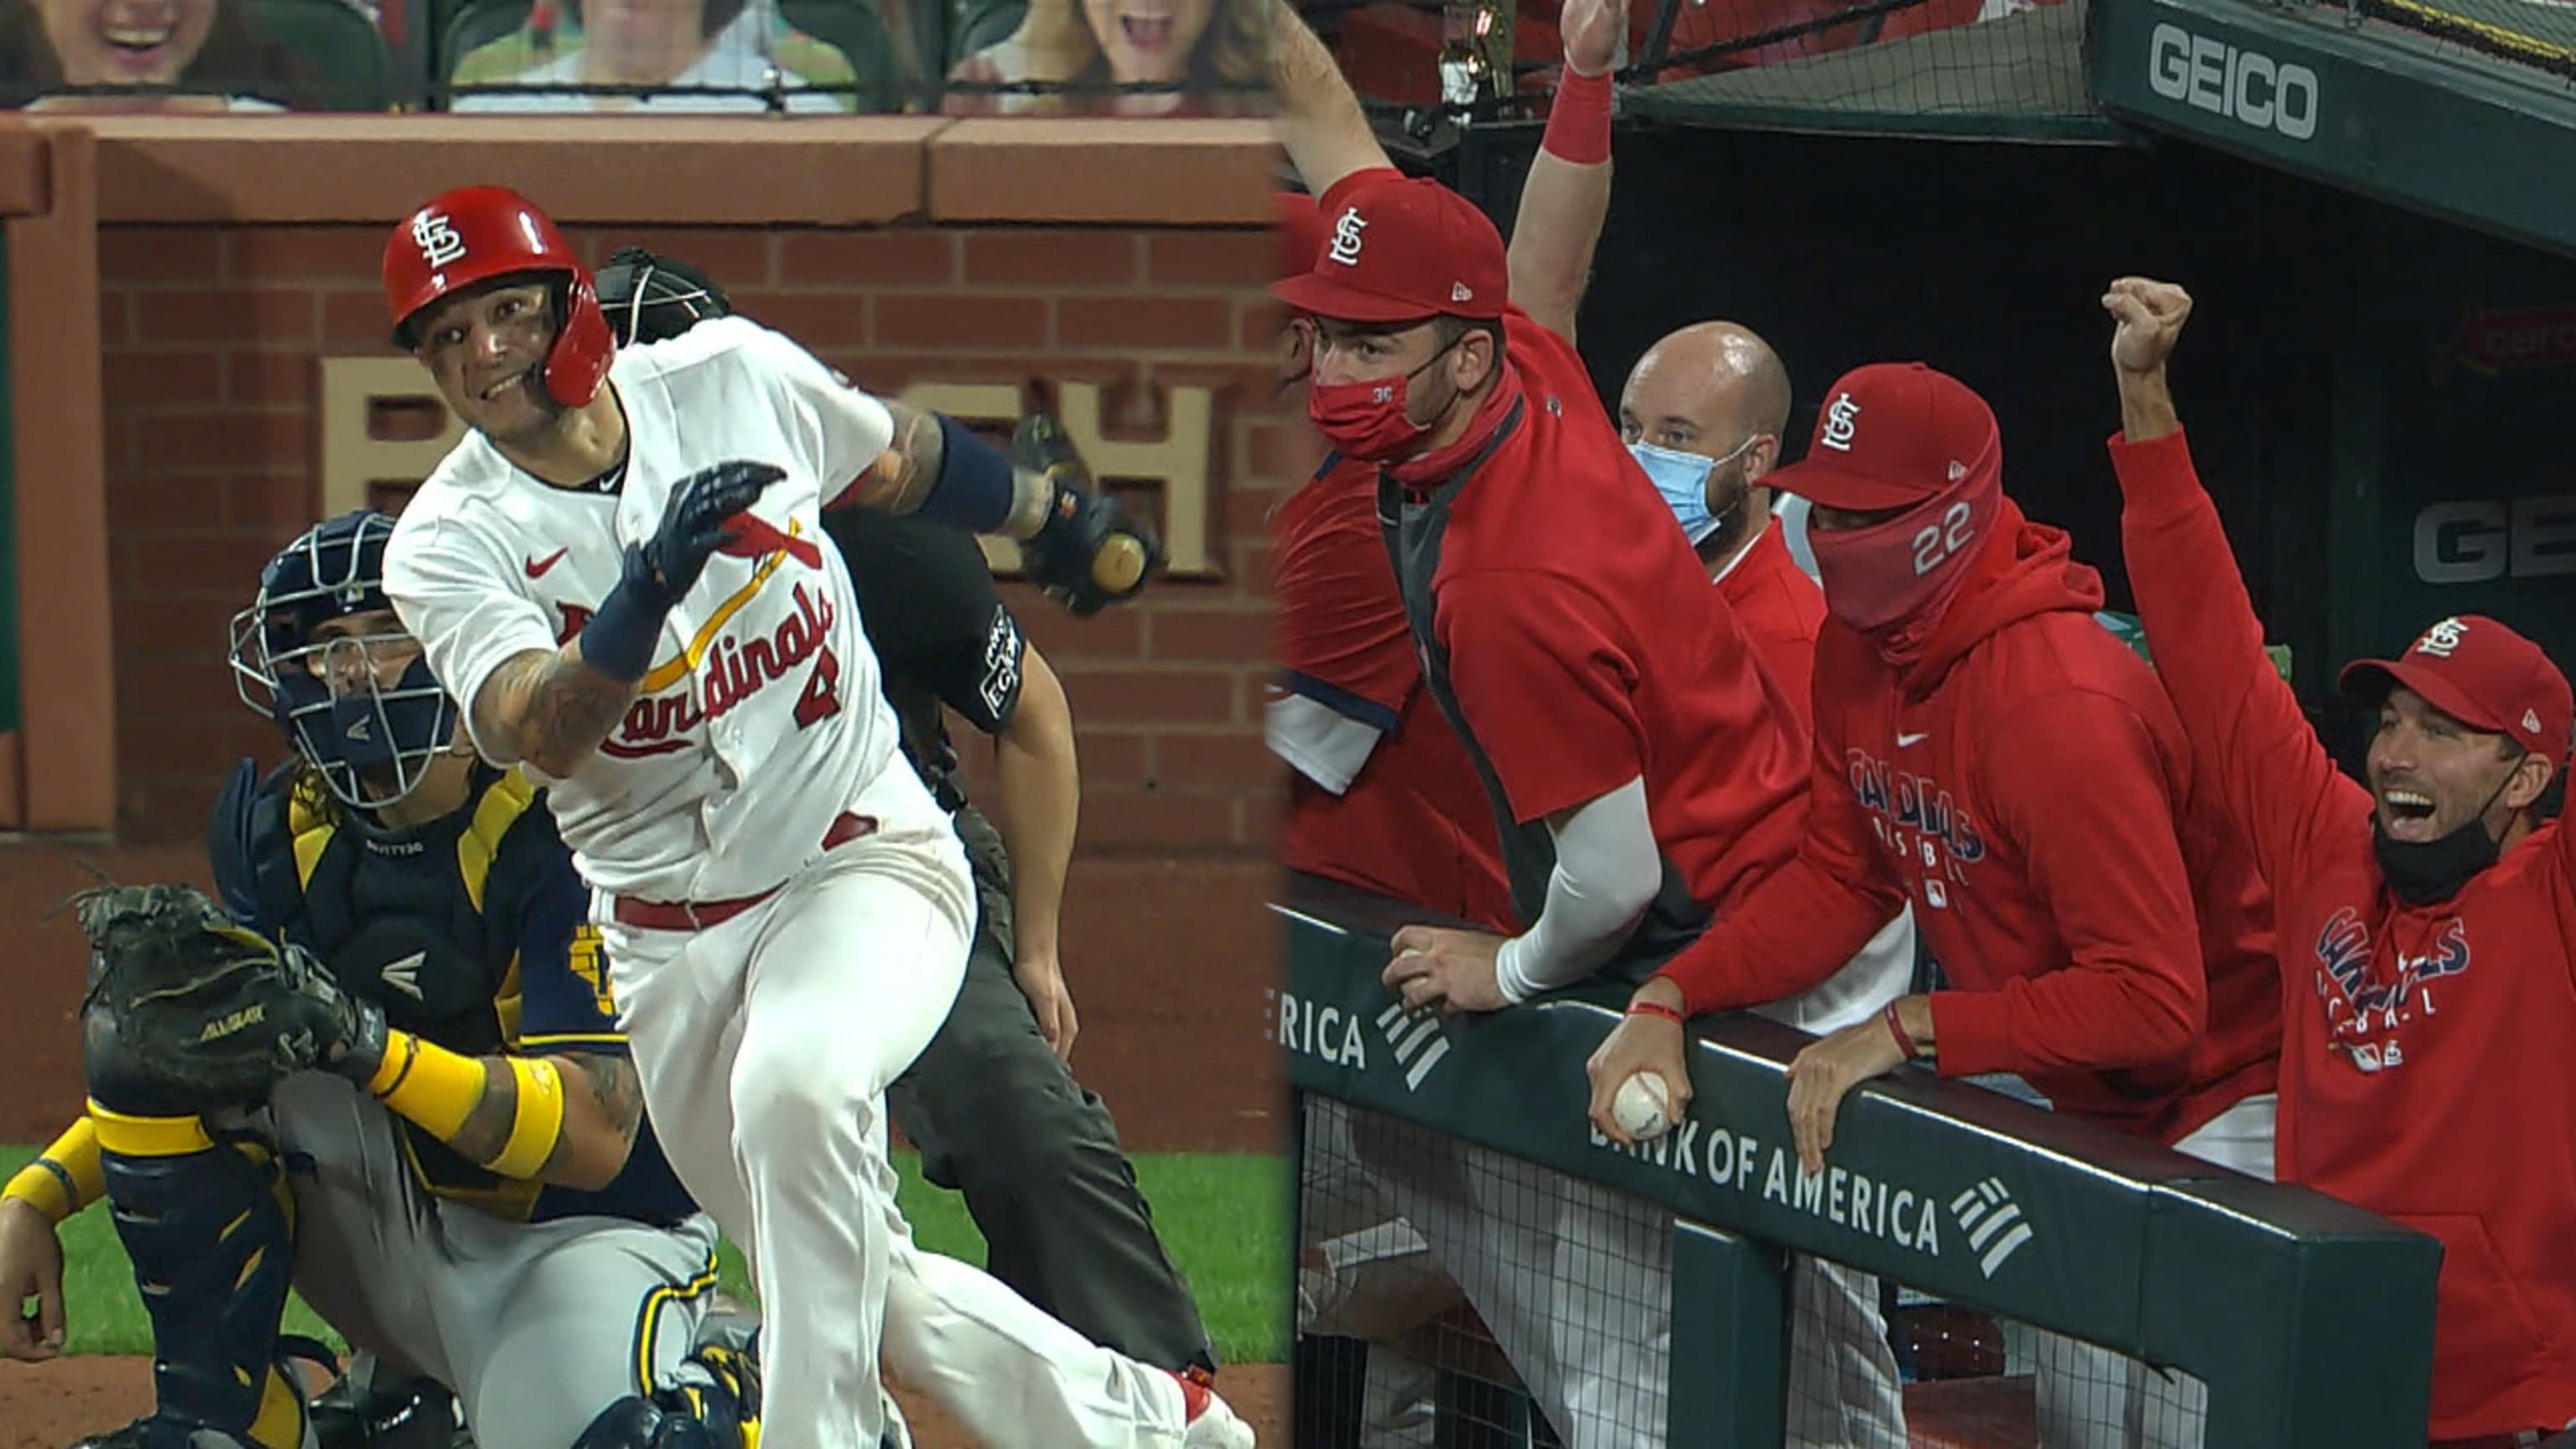 Yadier Molina catches 2,000th game as a Cardinal